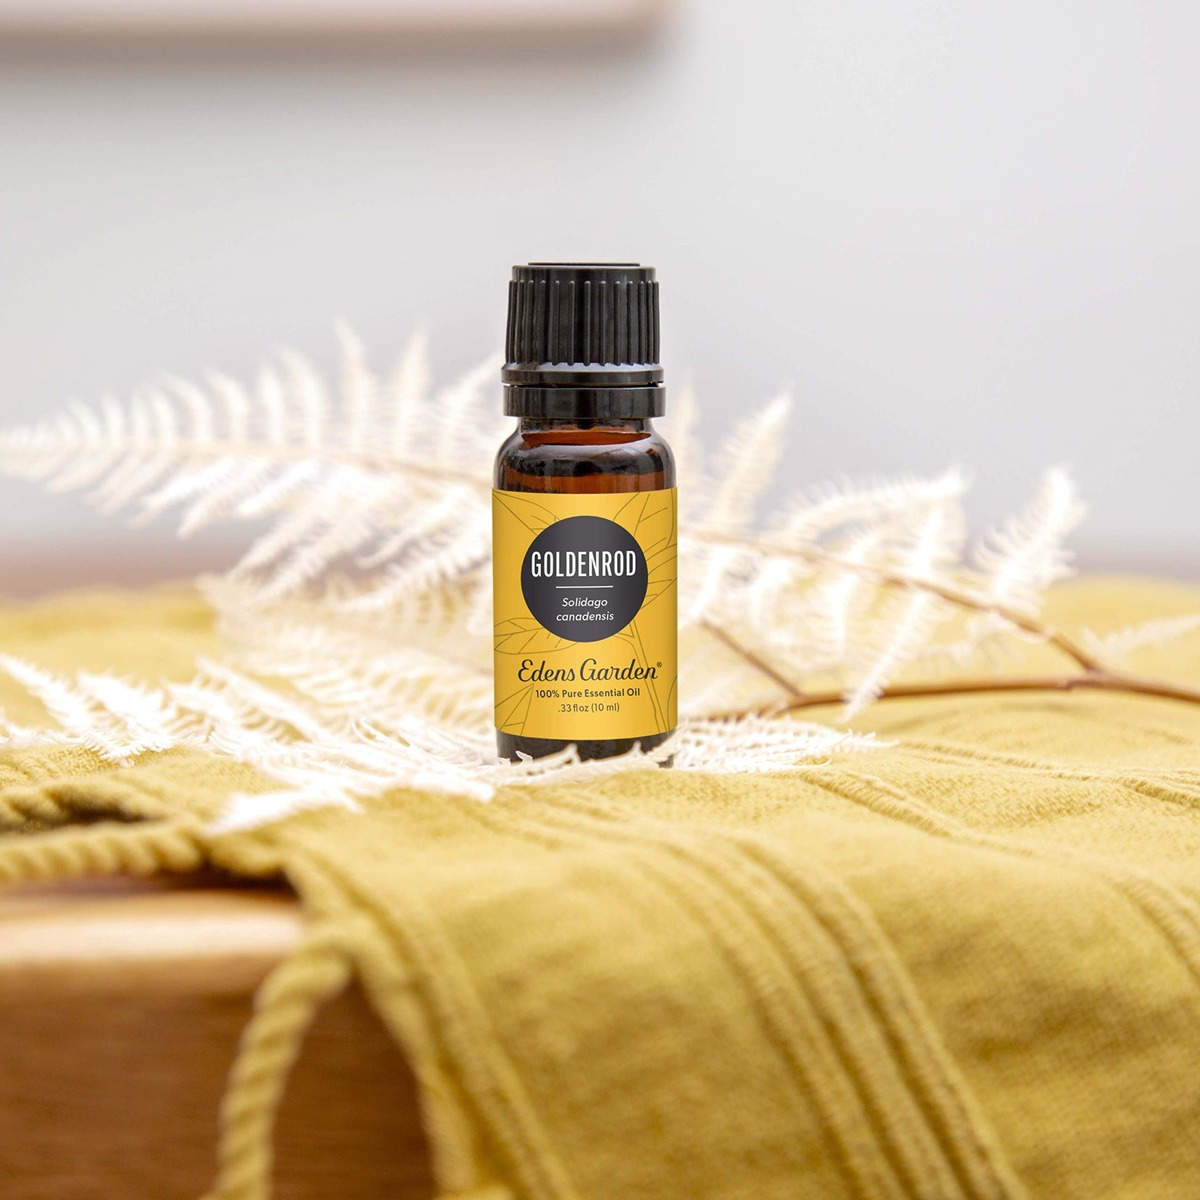 How To Use Goldenrod Essential Oil